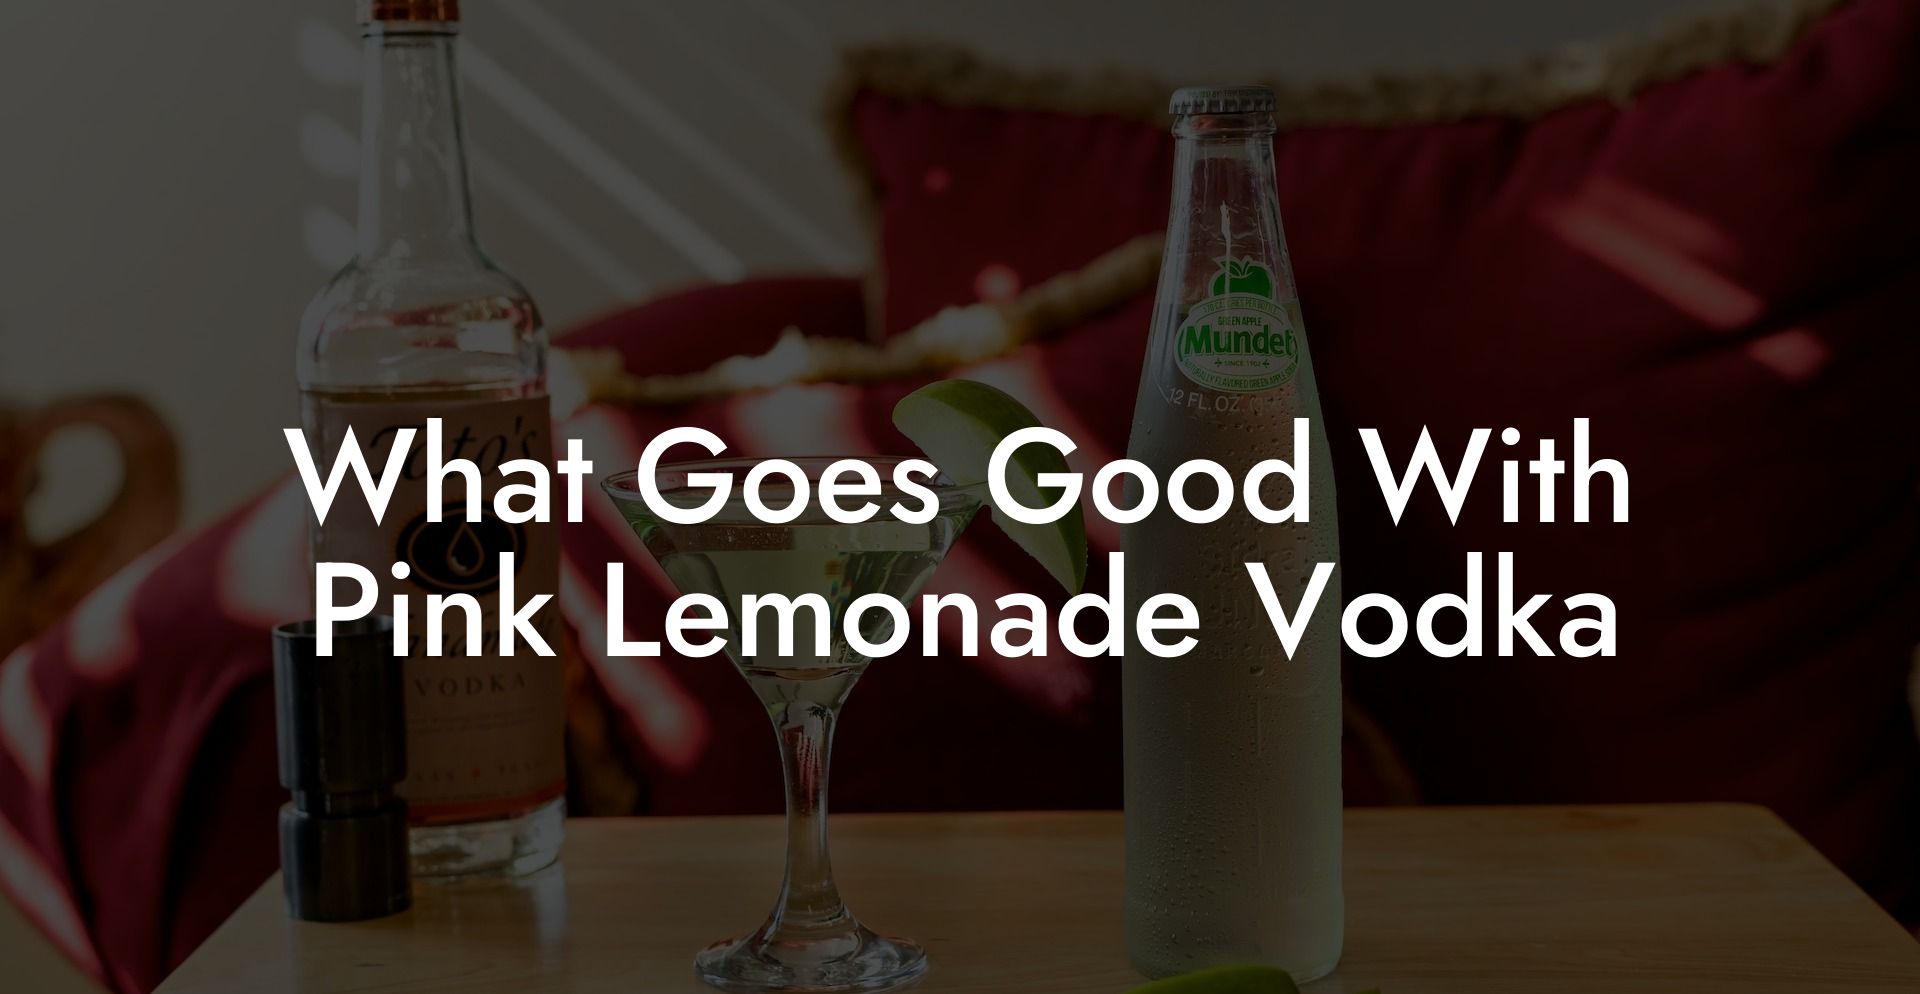 What Goes Good With Pink Lemonade Vodka